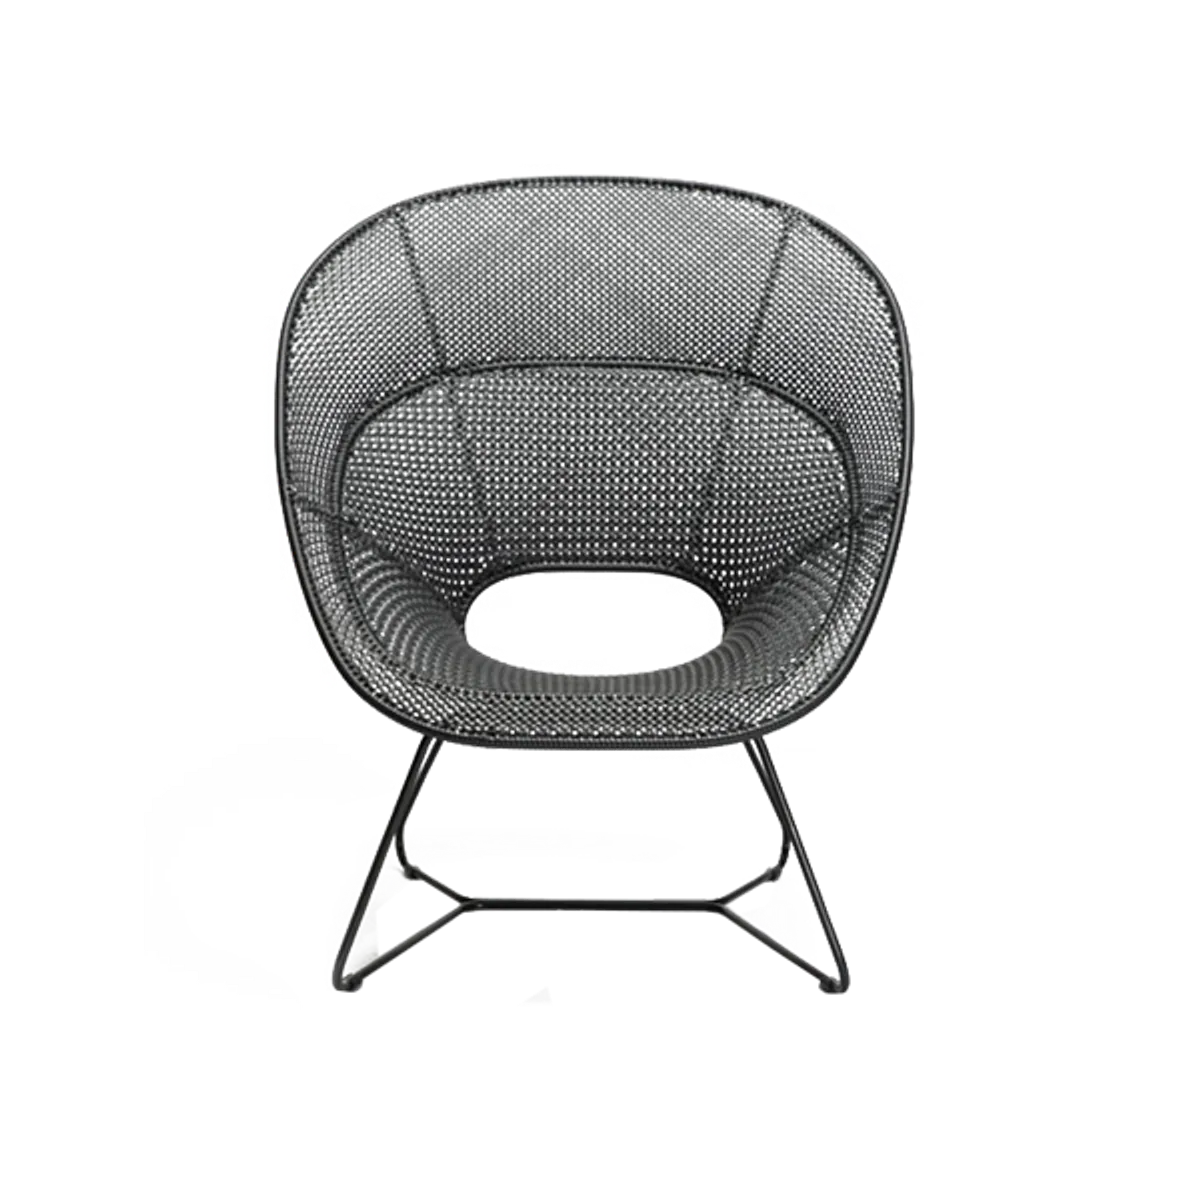 Web Trombone Outdoor Lounge Chair Black Rattan Furniture For Hotels And Poolside Cafes 018